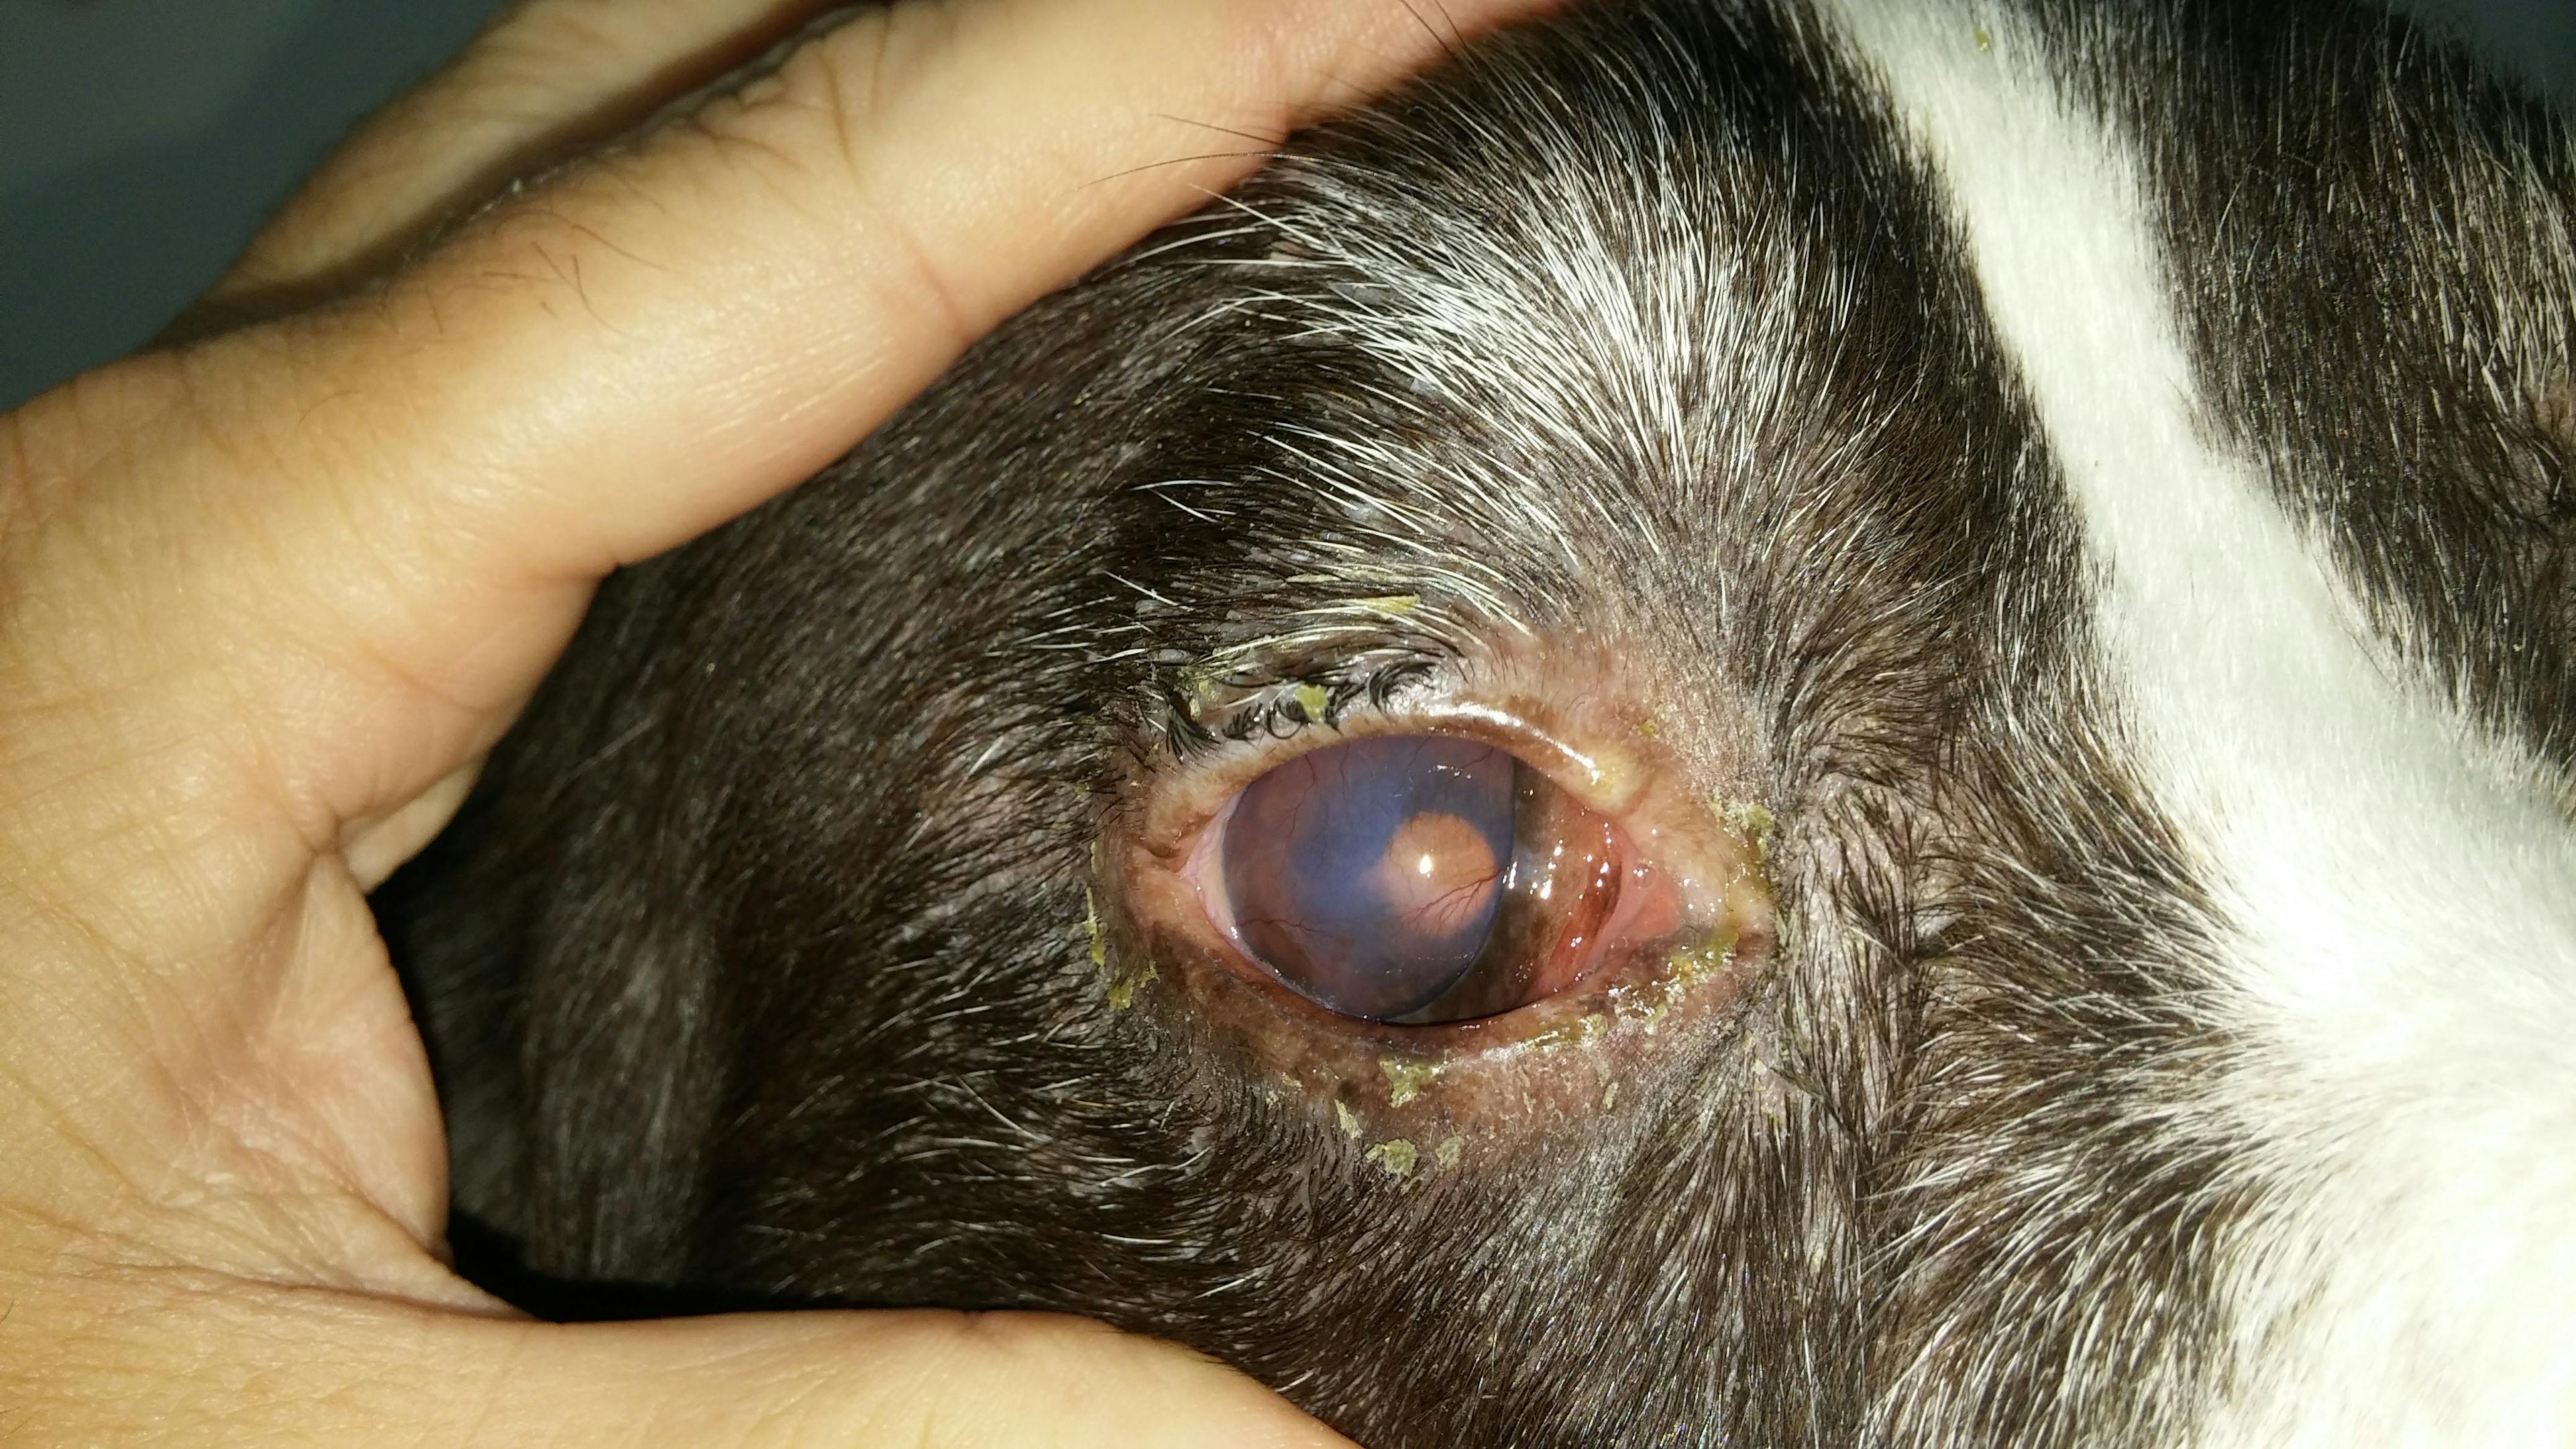 Figure 3. Purulent discharge and corneal vascularization (seen against the background of the tapetal reflection) in a dog with KCS.